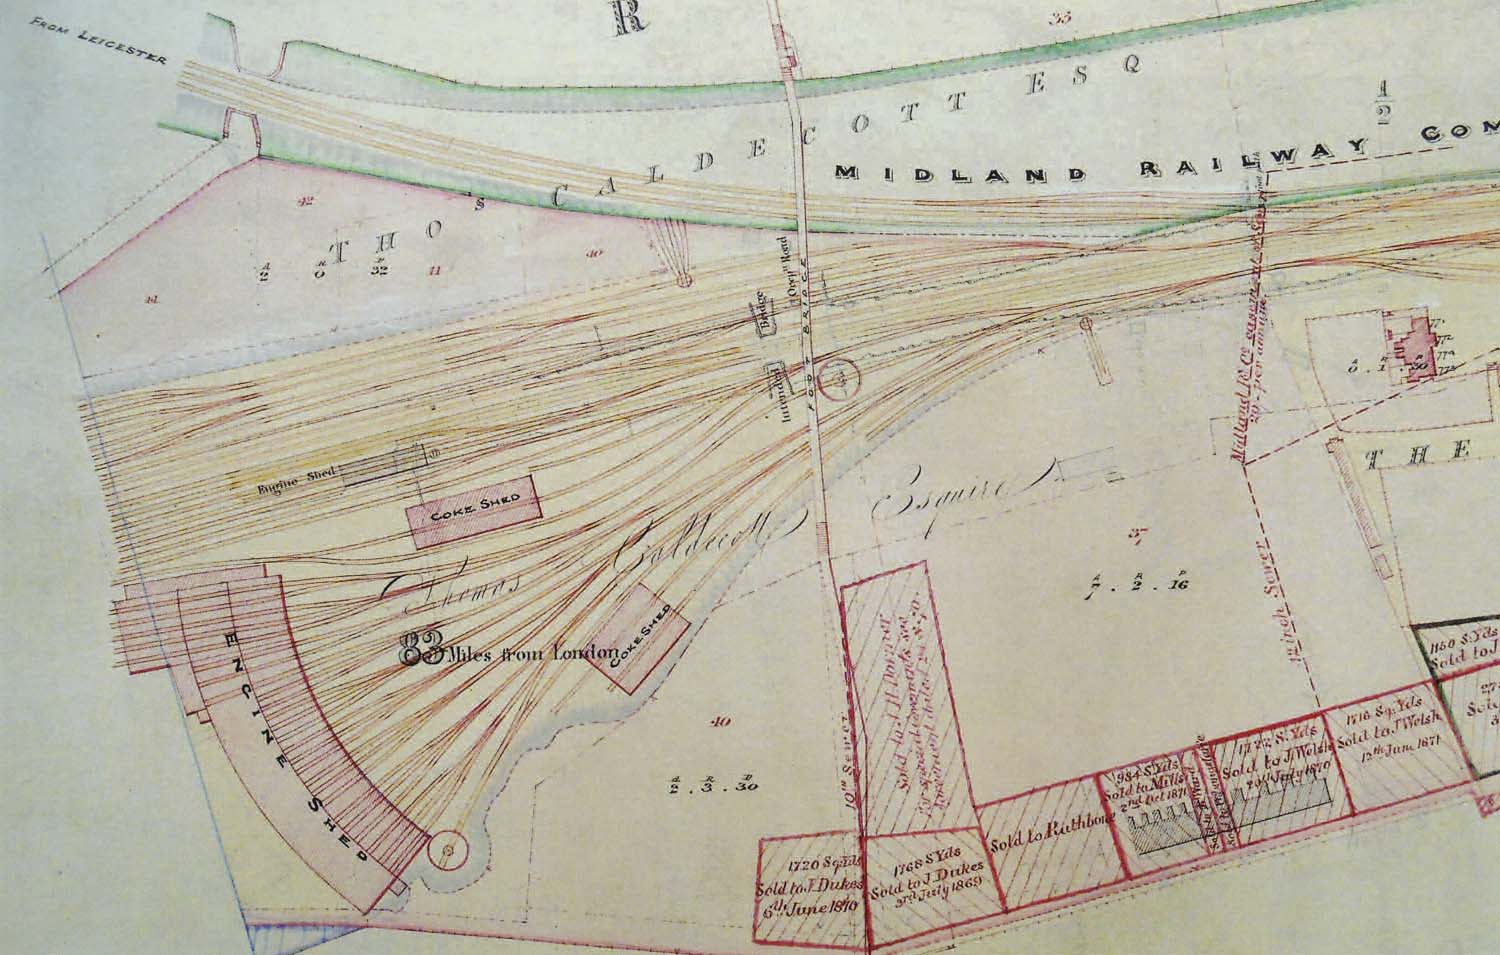 An 1863 Map of the 'northern' approach to Rugby showing the MR line to Leicester and the two LNWR lines to Birmingham and Stafford